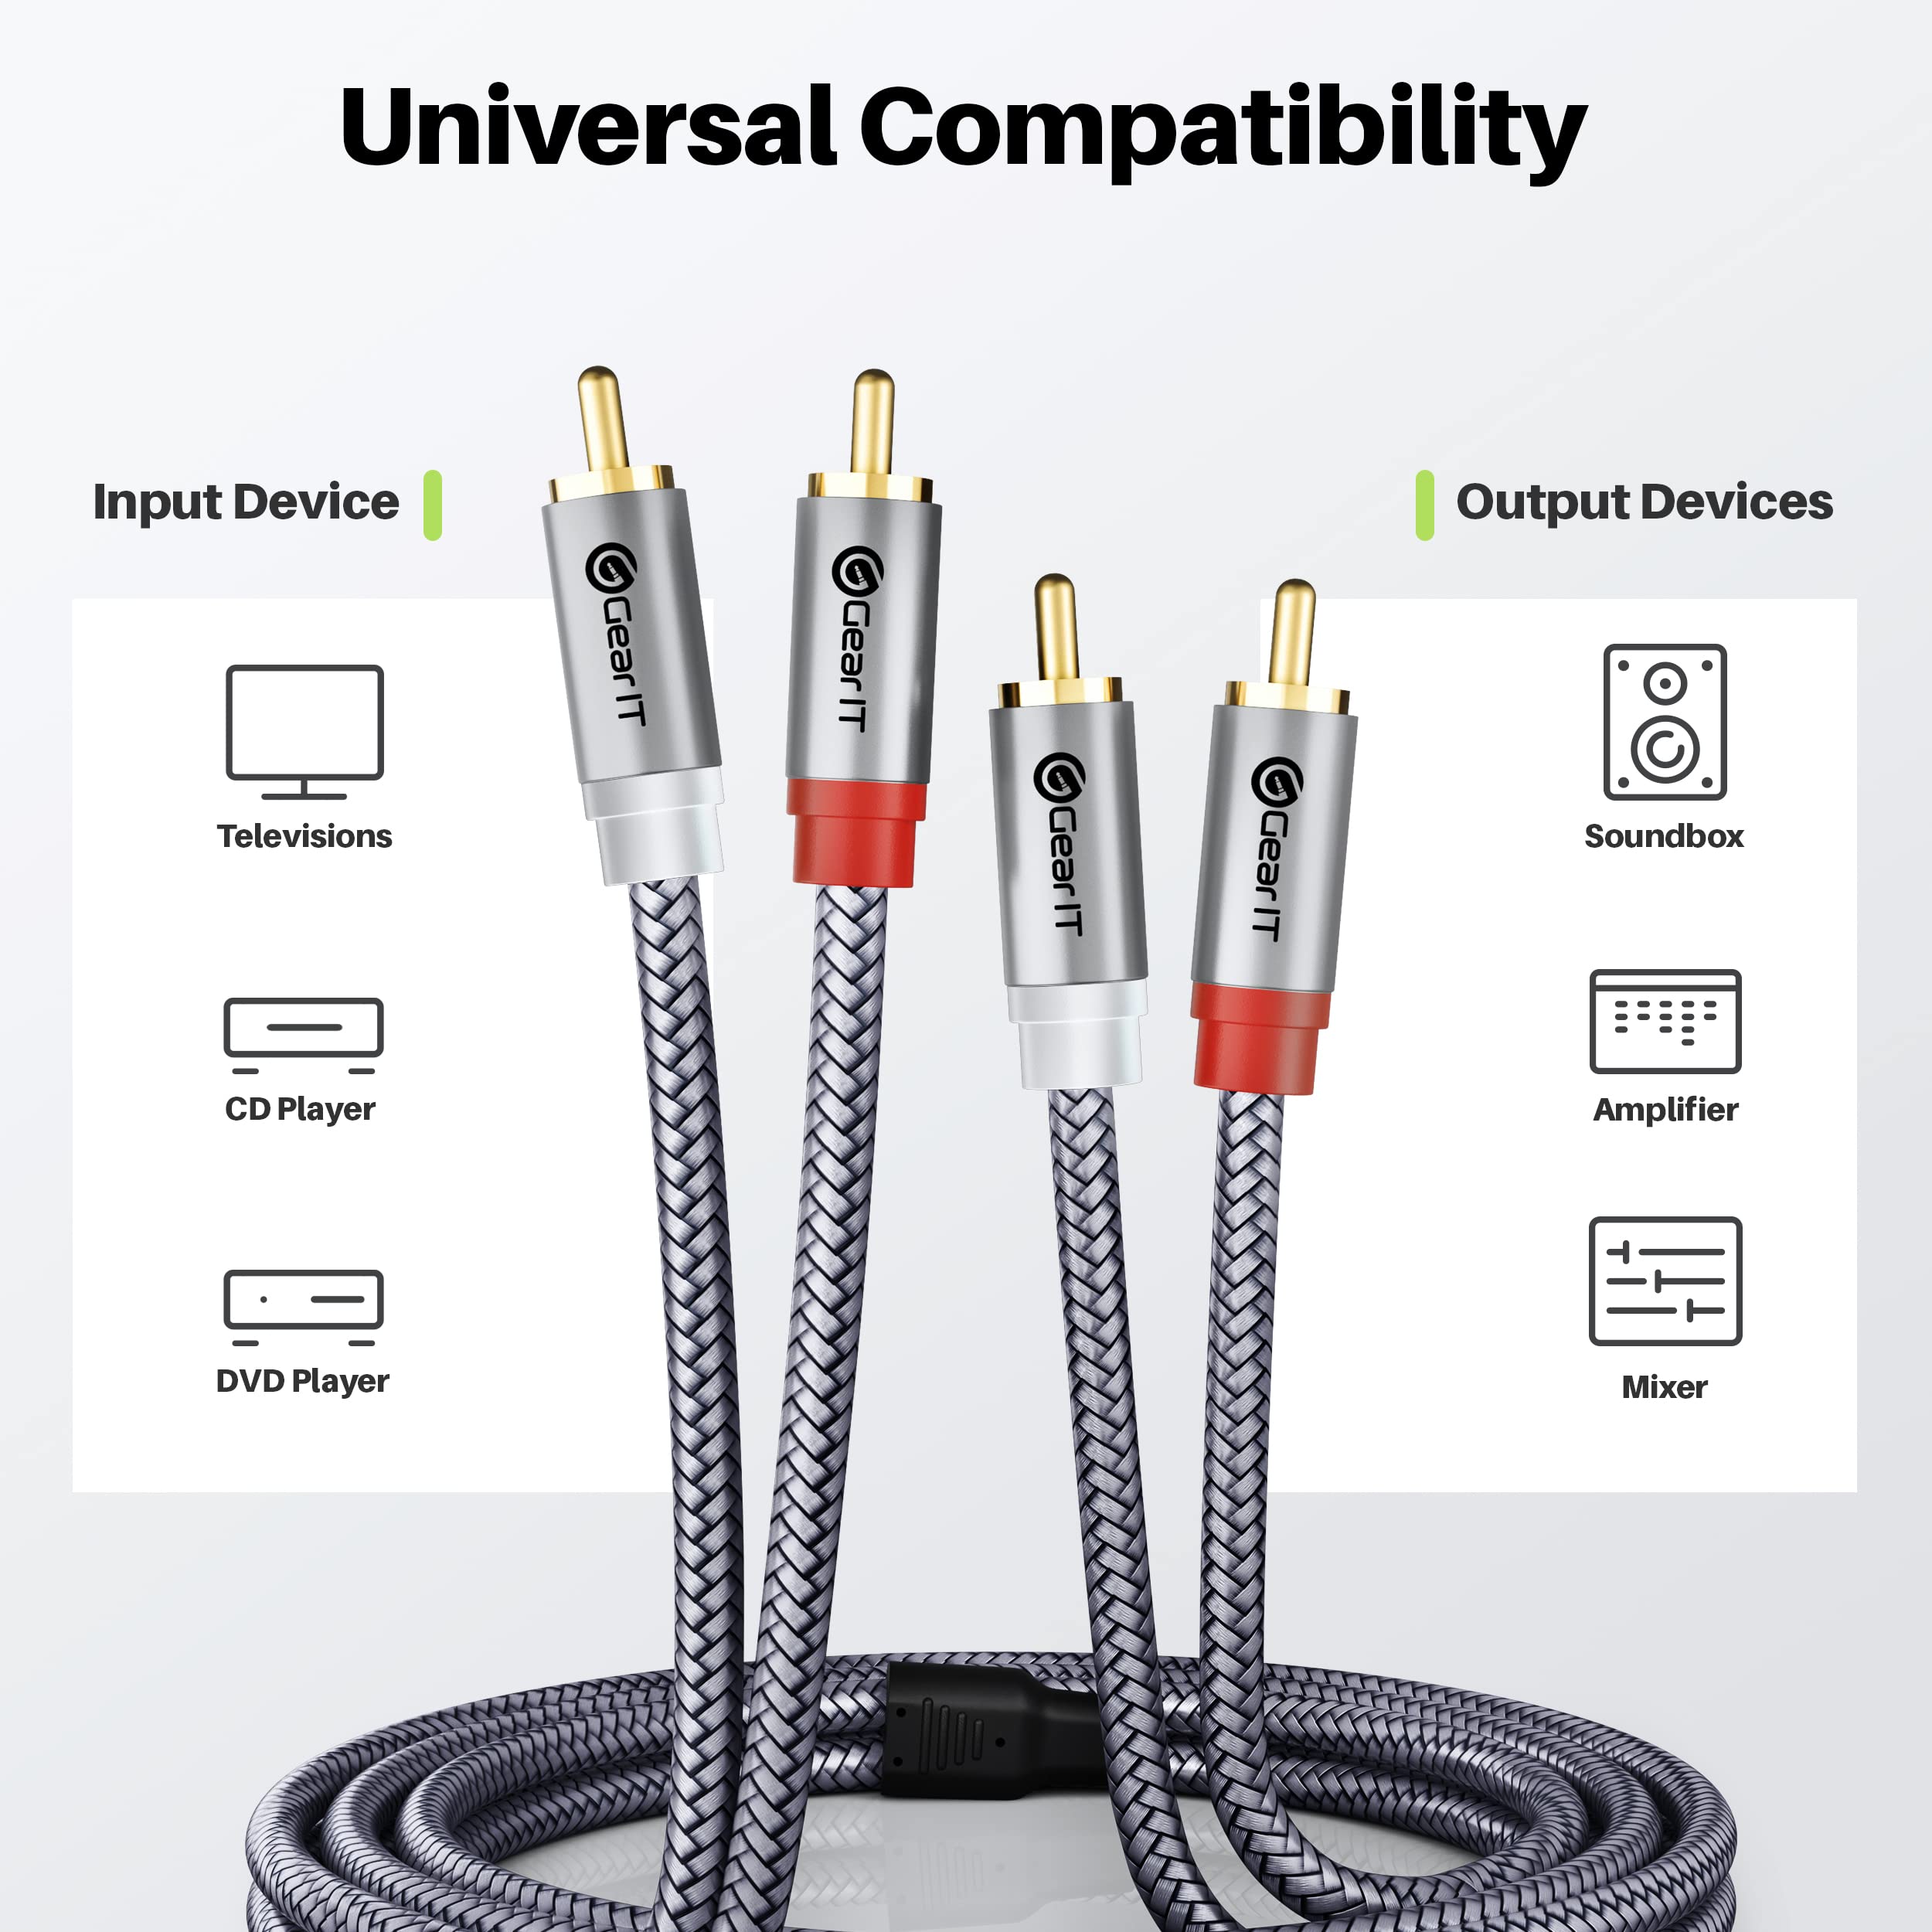 GearIT RCA Cable (10FT) 2RCA Male to 2RCA Male Stereo Audio Cables Shielded Braided RCA Stereo Cable for Home Theater, HDTV, Amplifiers, Hi-Fi Systems, Car Audio, Speakers, 10 Feet